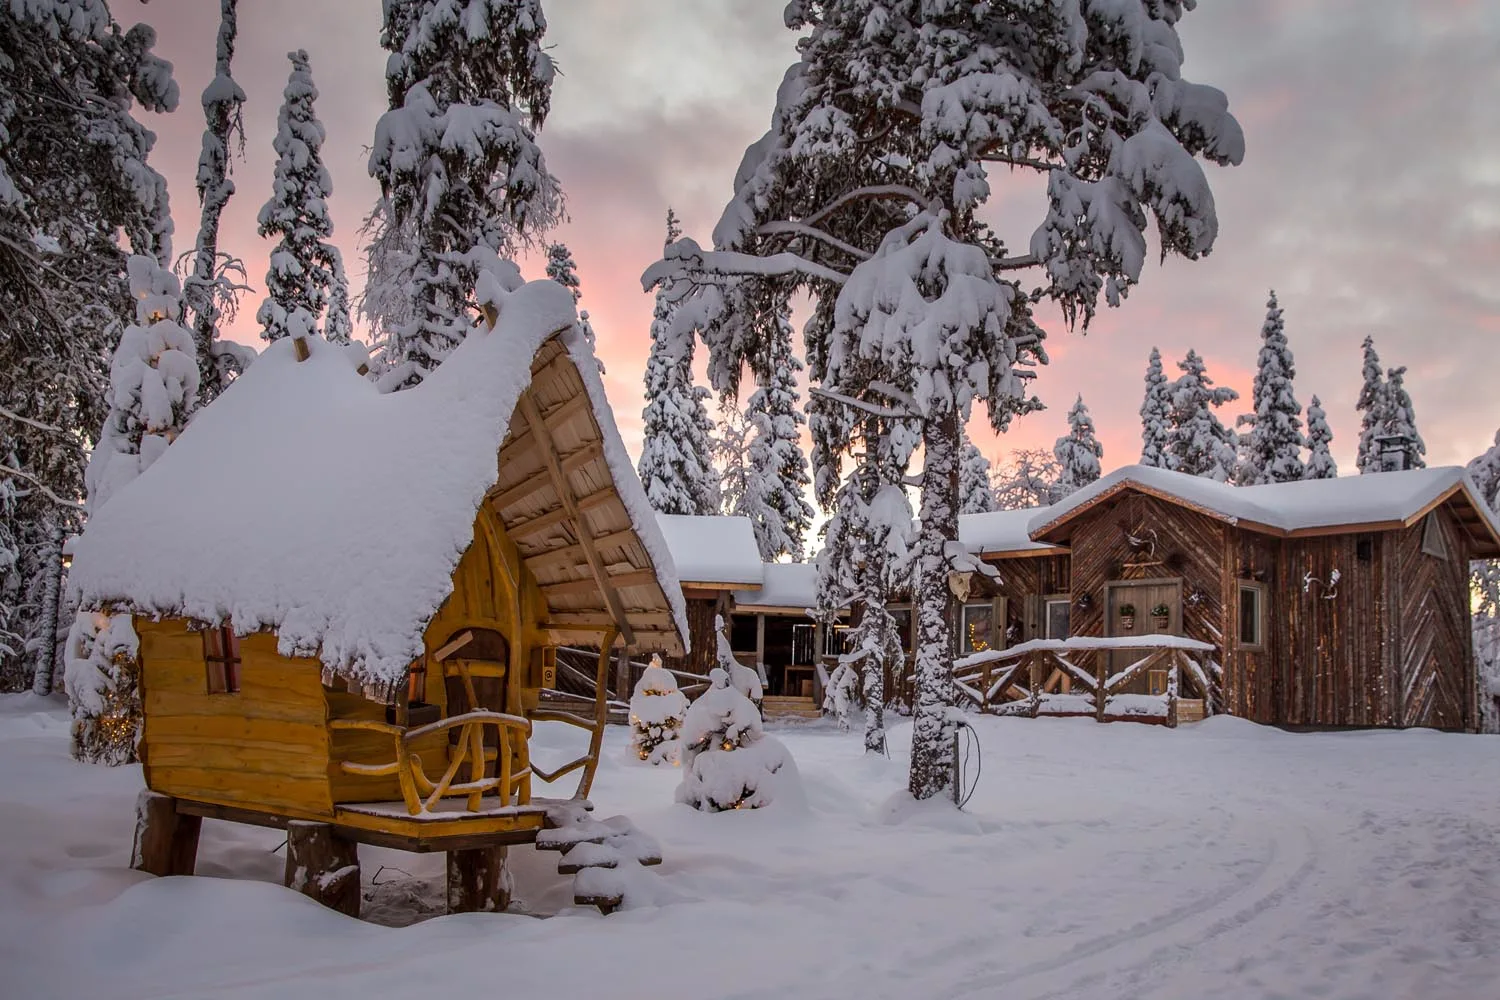 Tonttula Elves Hideaway - 9 Incredible places to stay in Finnish Lapland